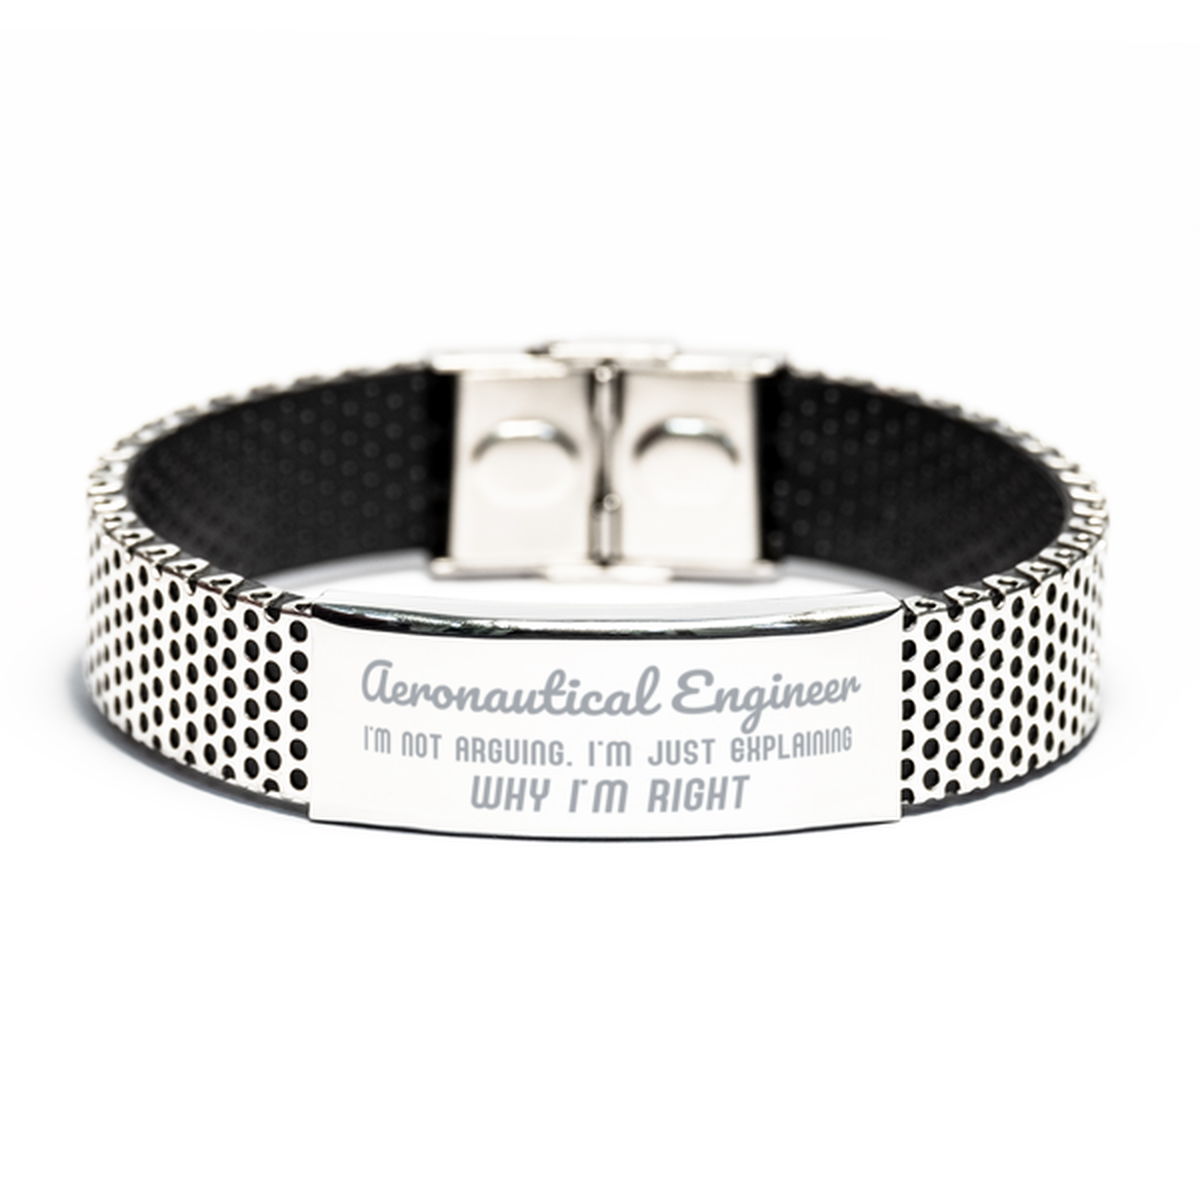 Aeronautical Engineer I'm not Arguing. I'm Just Explaining Why I'm RIGHT Stainless Steel Bracelet, Funny Saying Quote Aeronautical Engineer Gifts For Aeronautical Engineer Graduation Birthday Christmas Gifts for Men Women Coworker